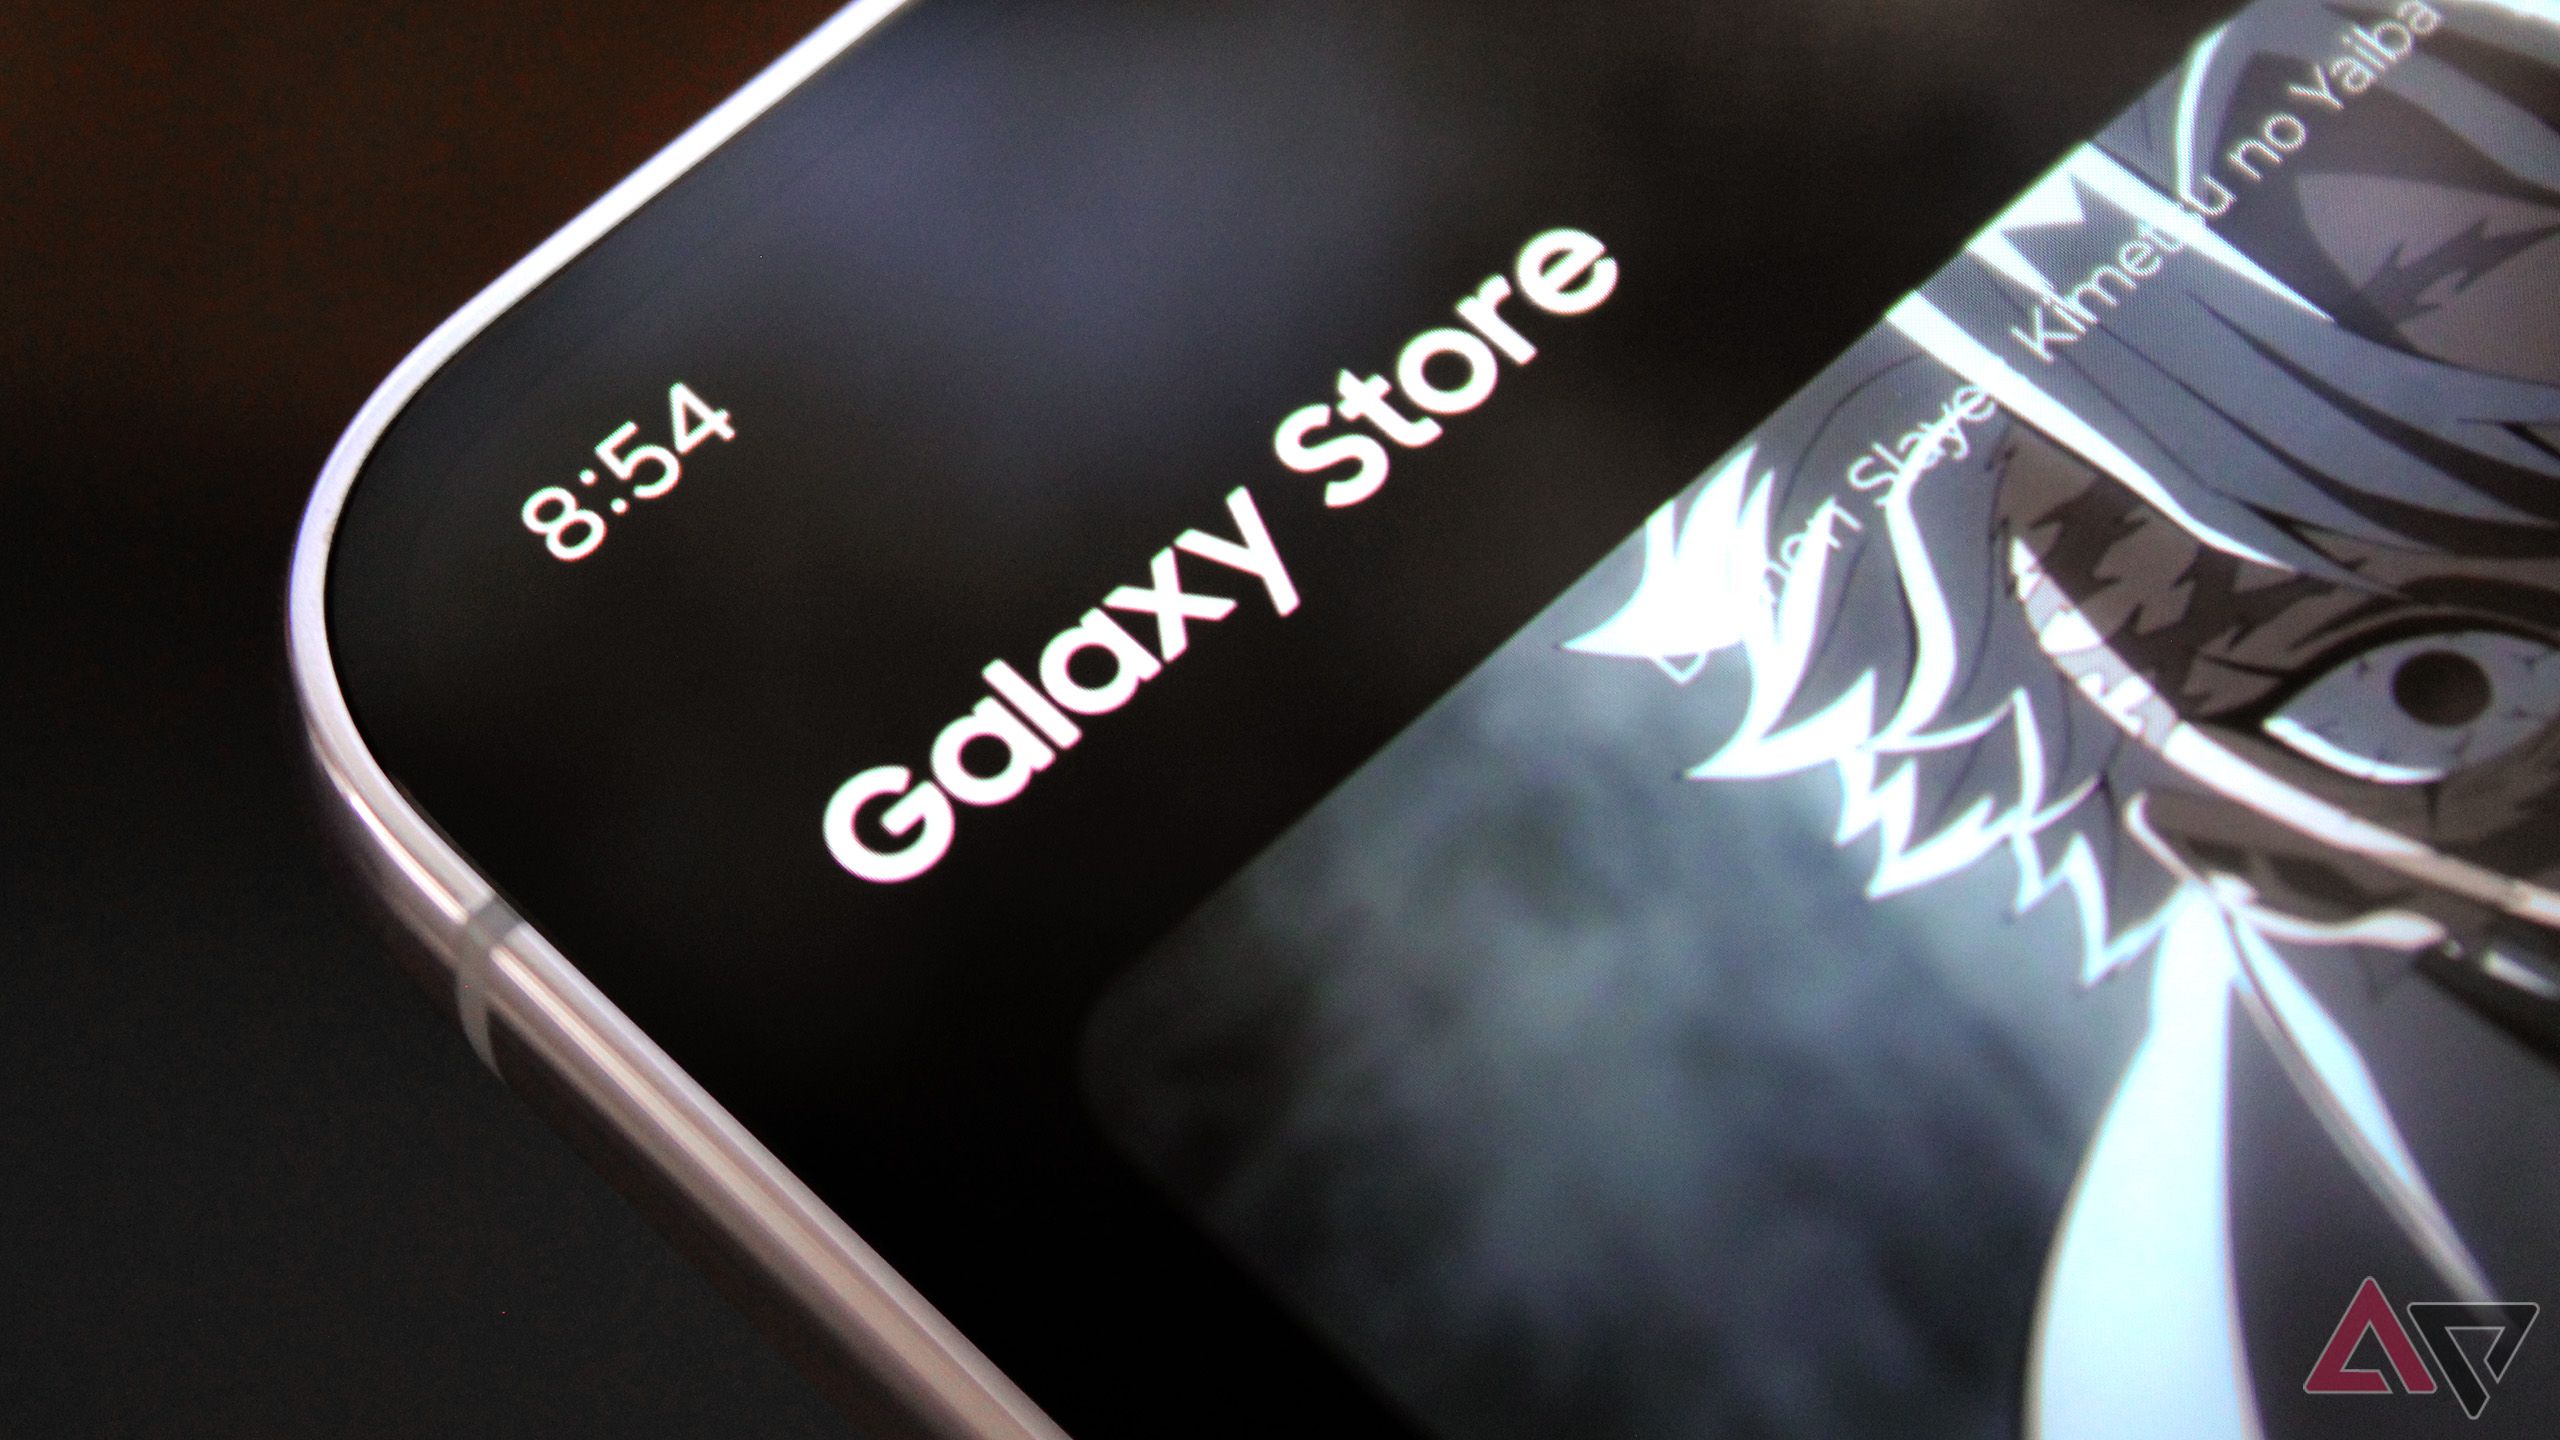 Samsung’s sideloading restrictions just saw it lose one of the biggest Galaxy Store games